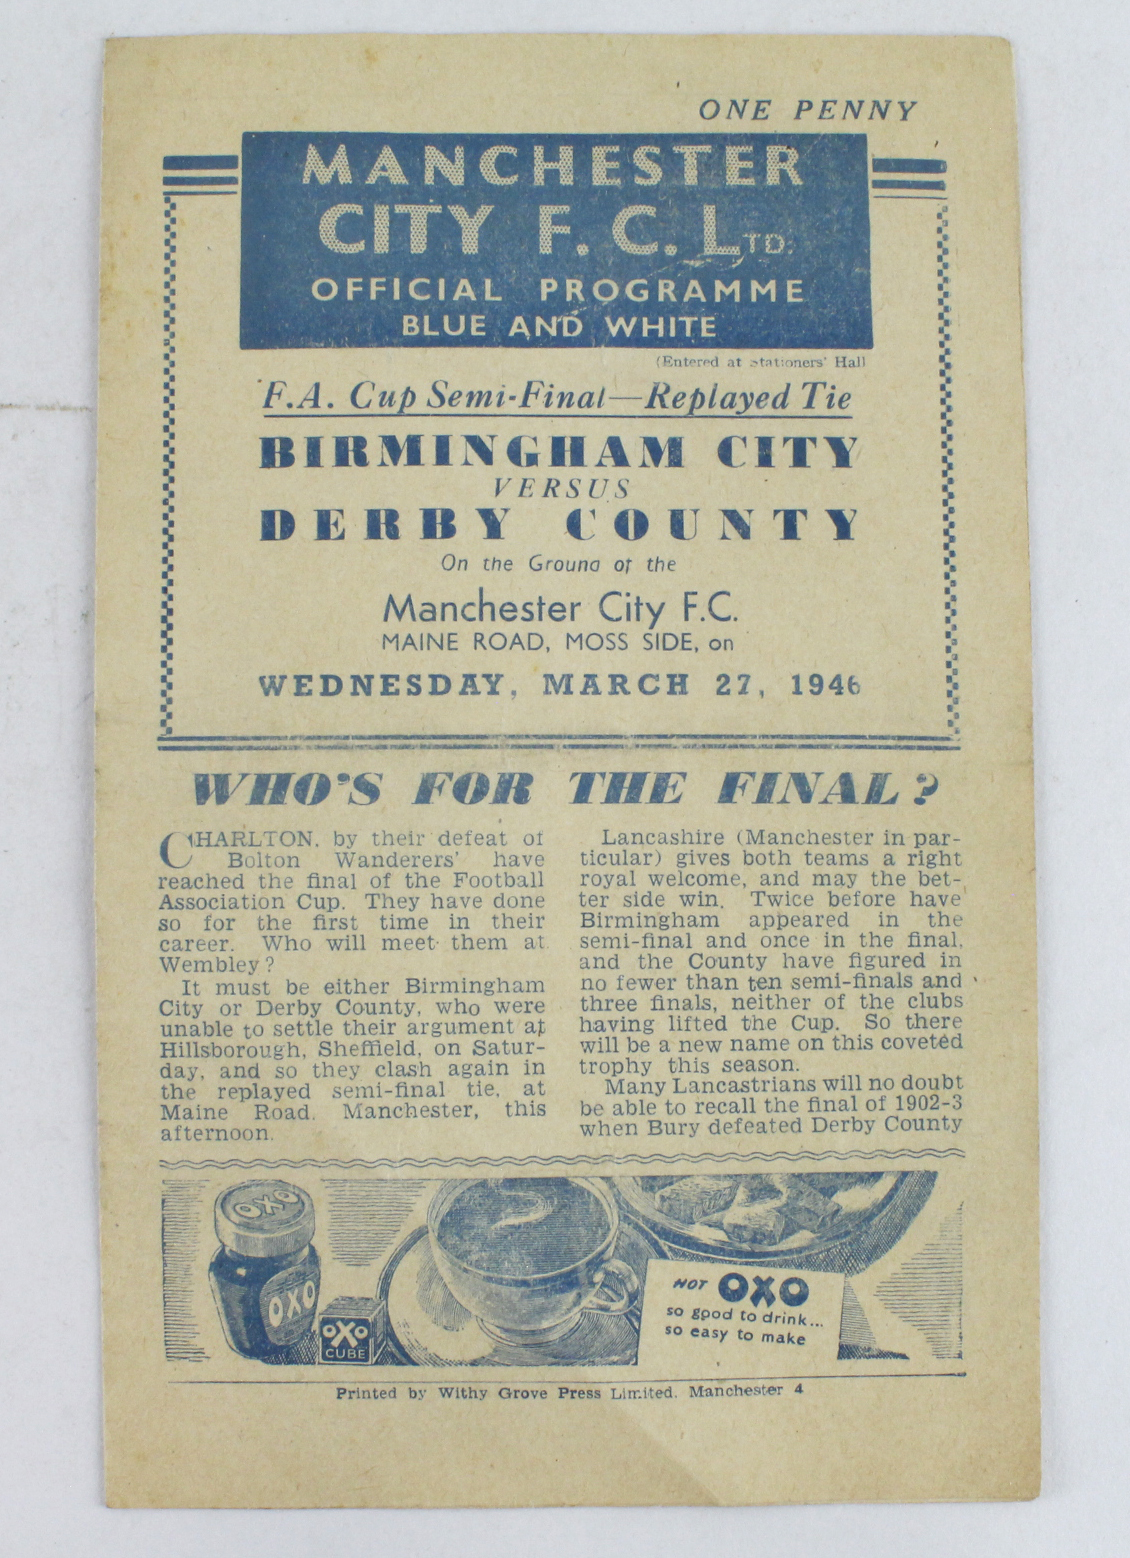 Football - Birmingham v Derby 27 March 1946 FA Cup Semi Final Replay at Manchester City